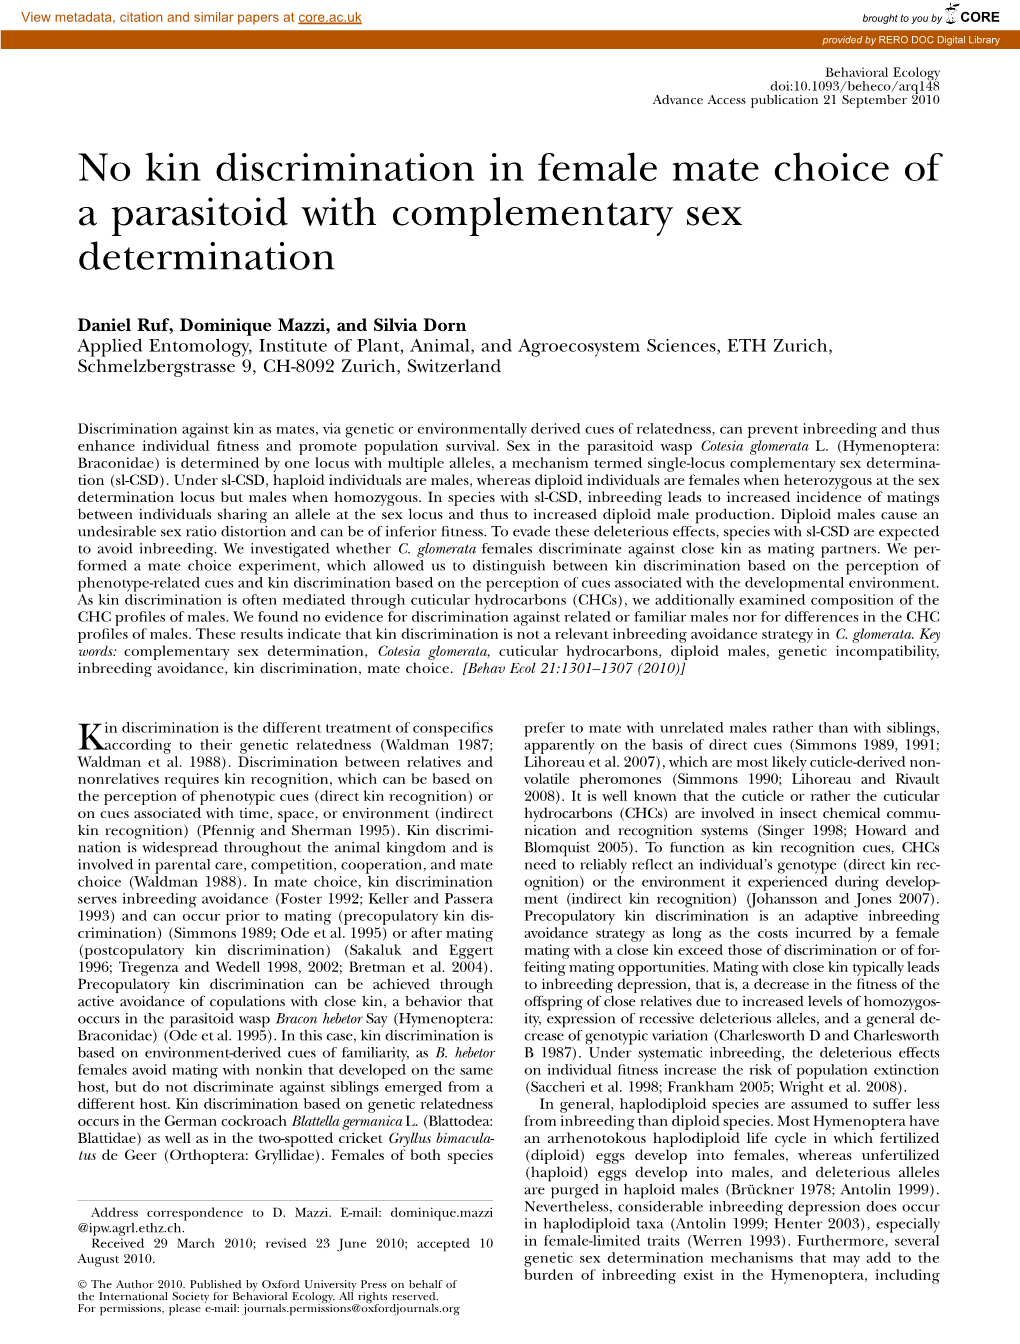 No Kin Discrimination in Female Mate Choice of a Parasitoid with Complementary Sex Determination